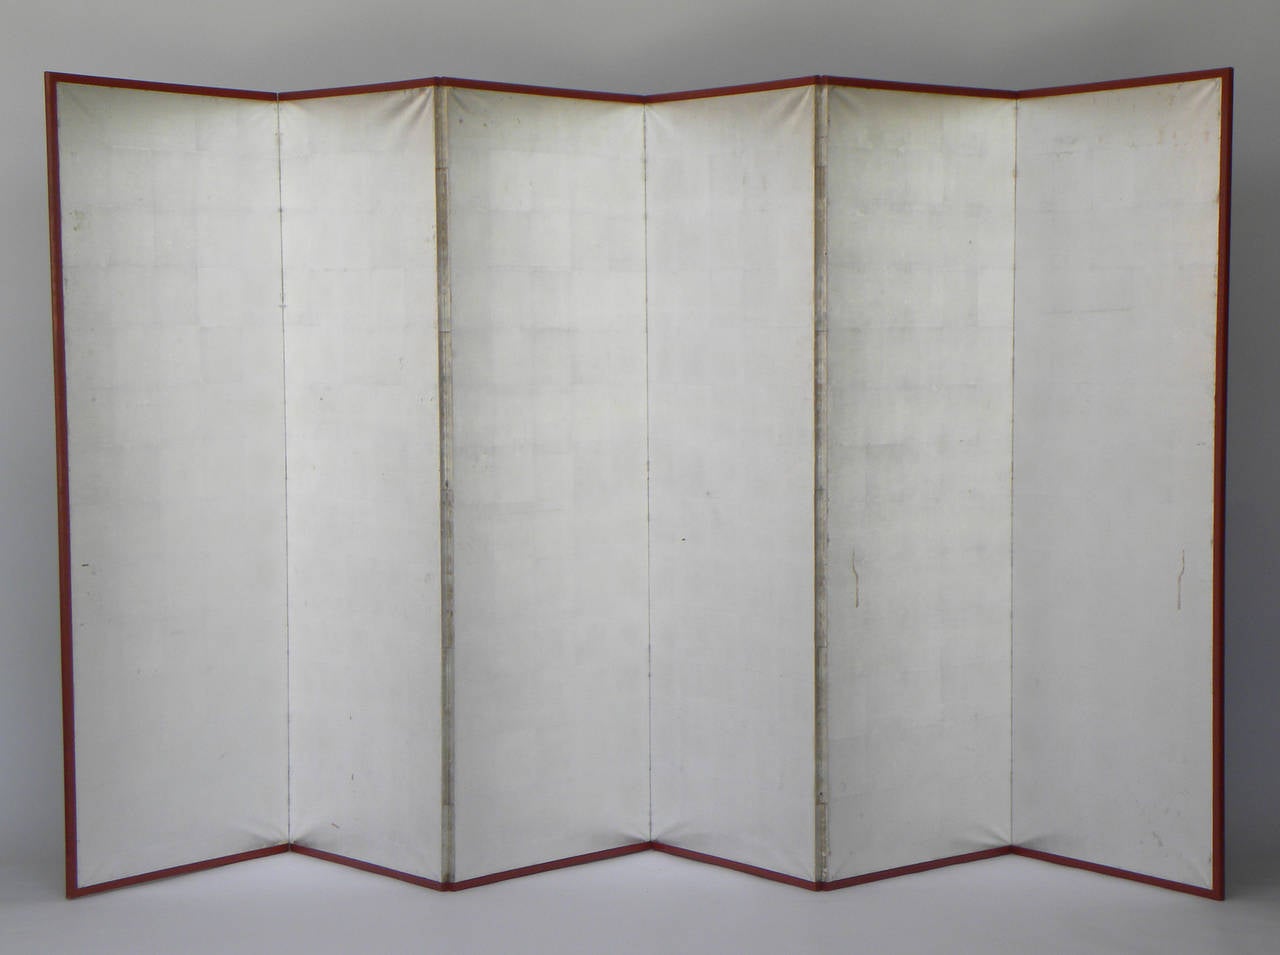 Six-panel silver leafed screen from Japan, circa 1870.